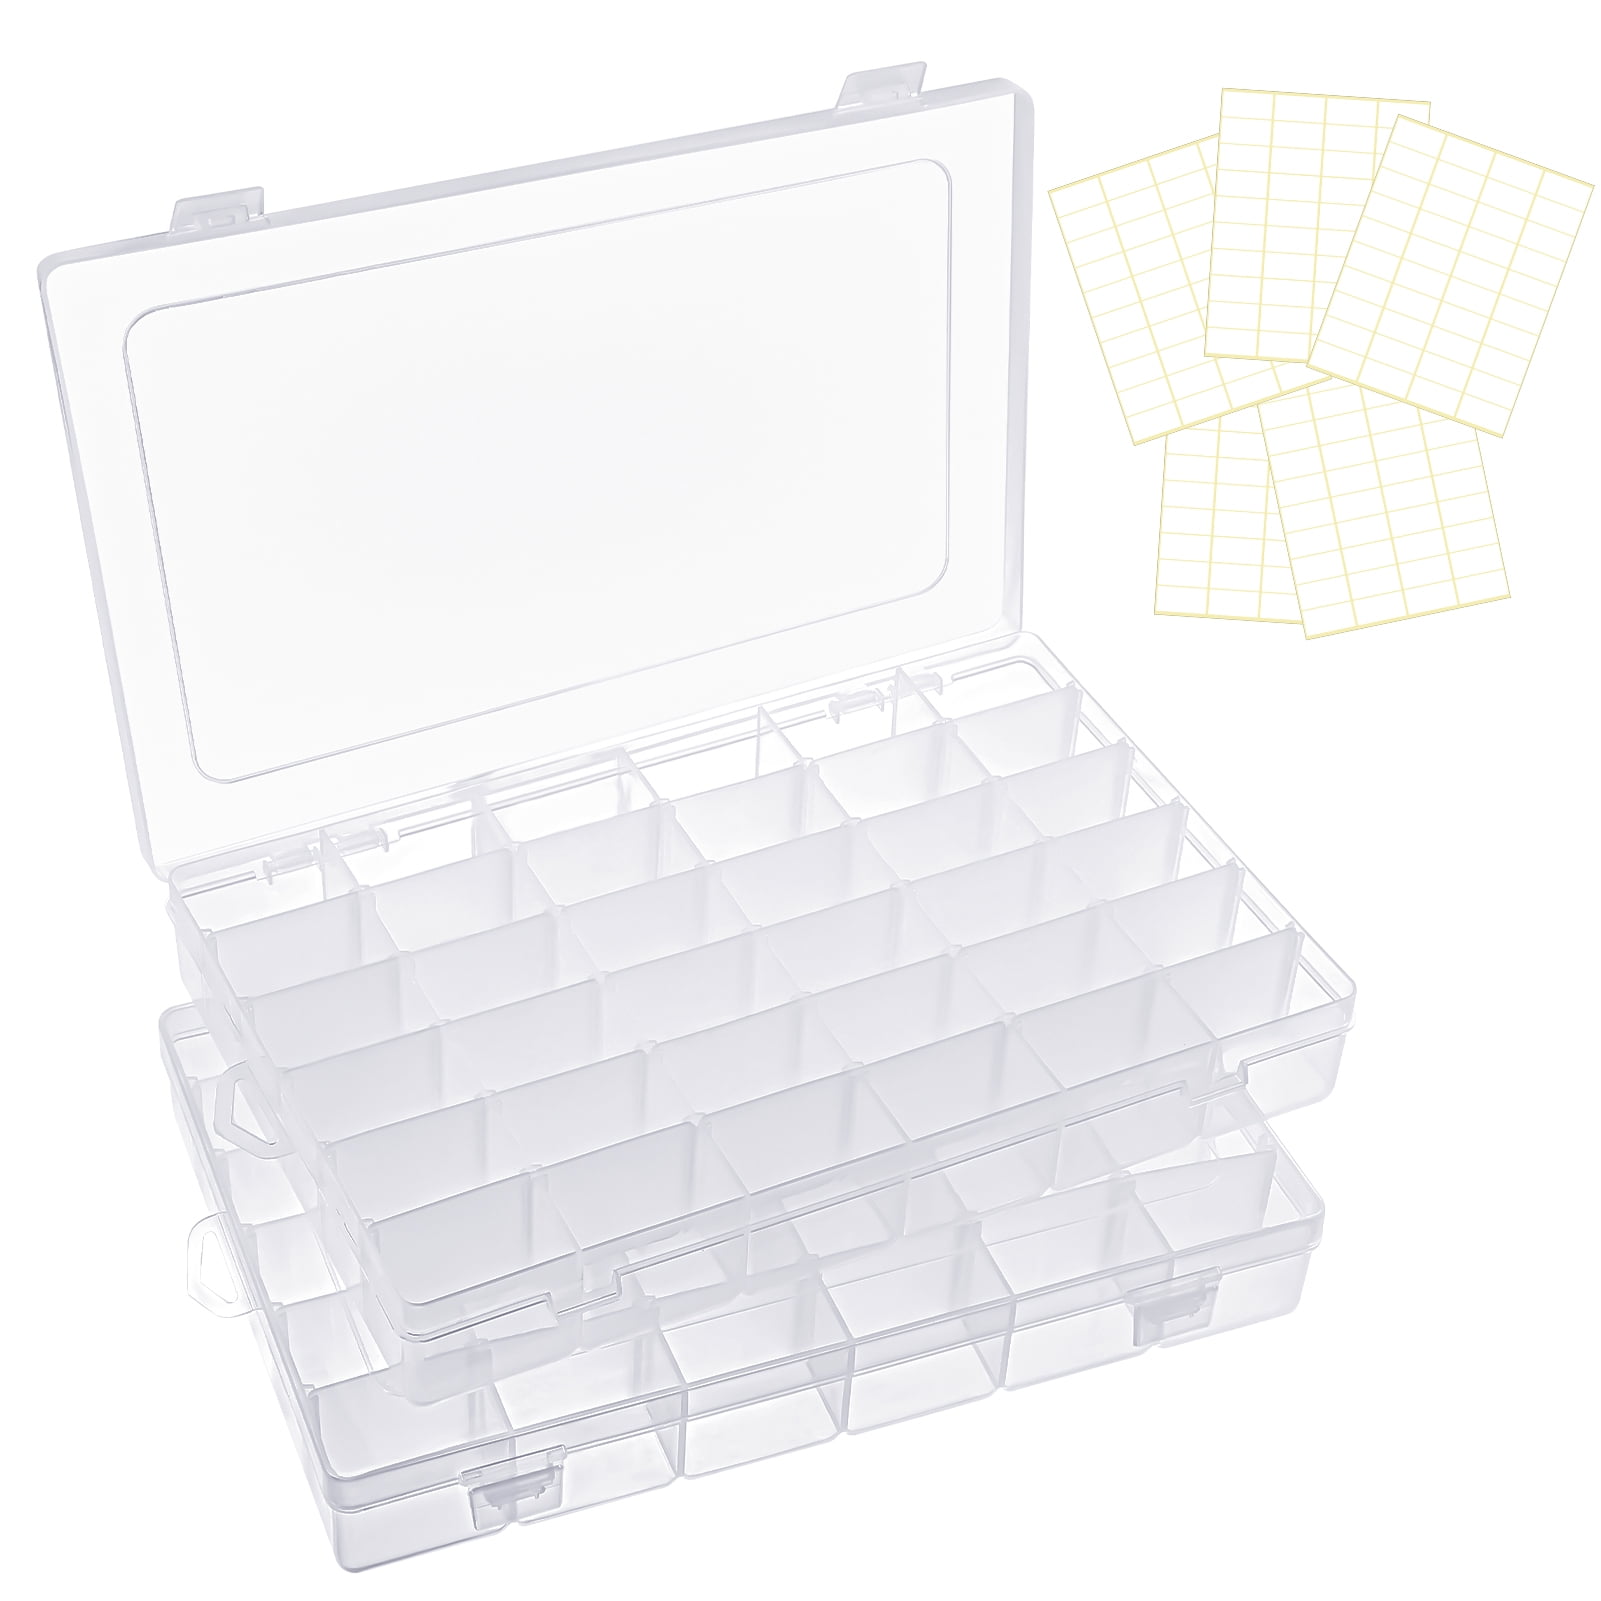 N/K Vidifor 12 Grids Plastic Storage Organizer Box, Storage Container,  Jewelry Organizer, Parts Storage Box with Dividers for Crafts, Buttons,  Pins